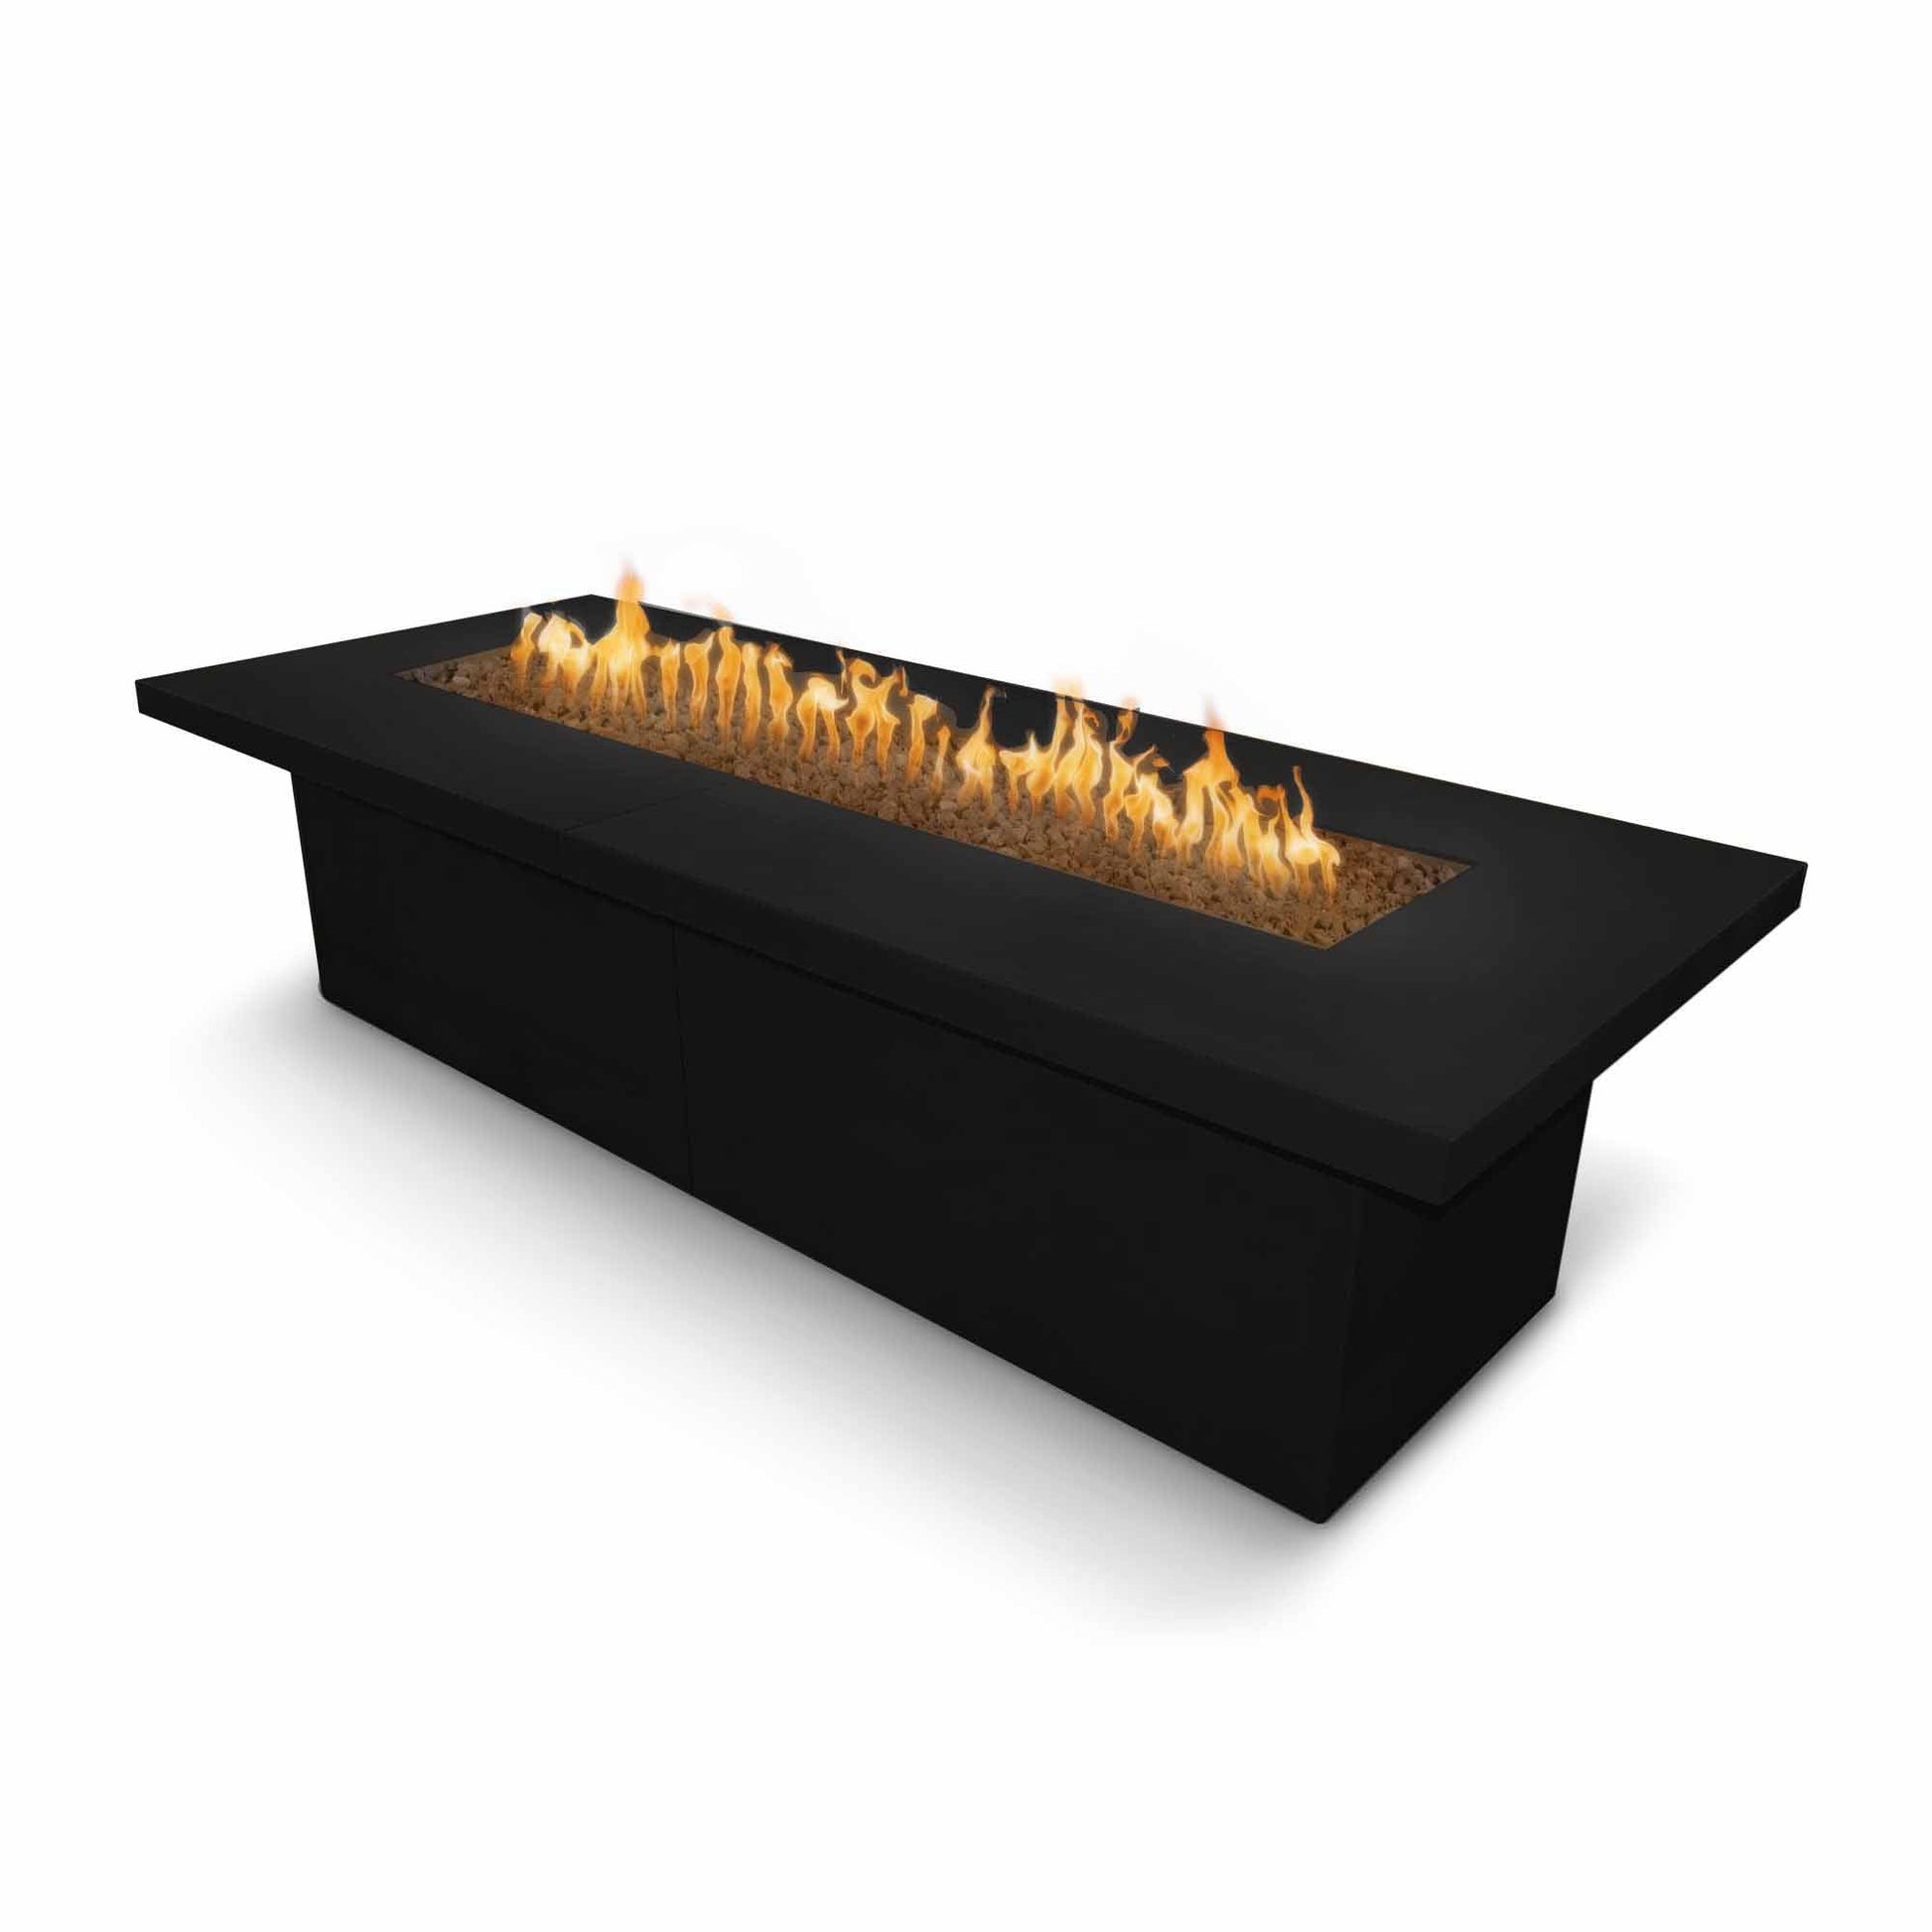 The Outdoor Plus Rectangular Newport 72" Corten Steel Liquid Propane Fire Pit with Flame Sense with Spark Ignition